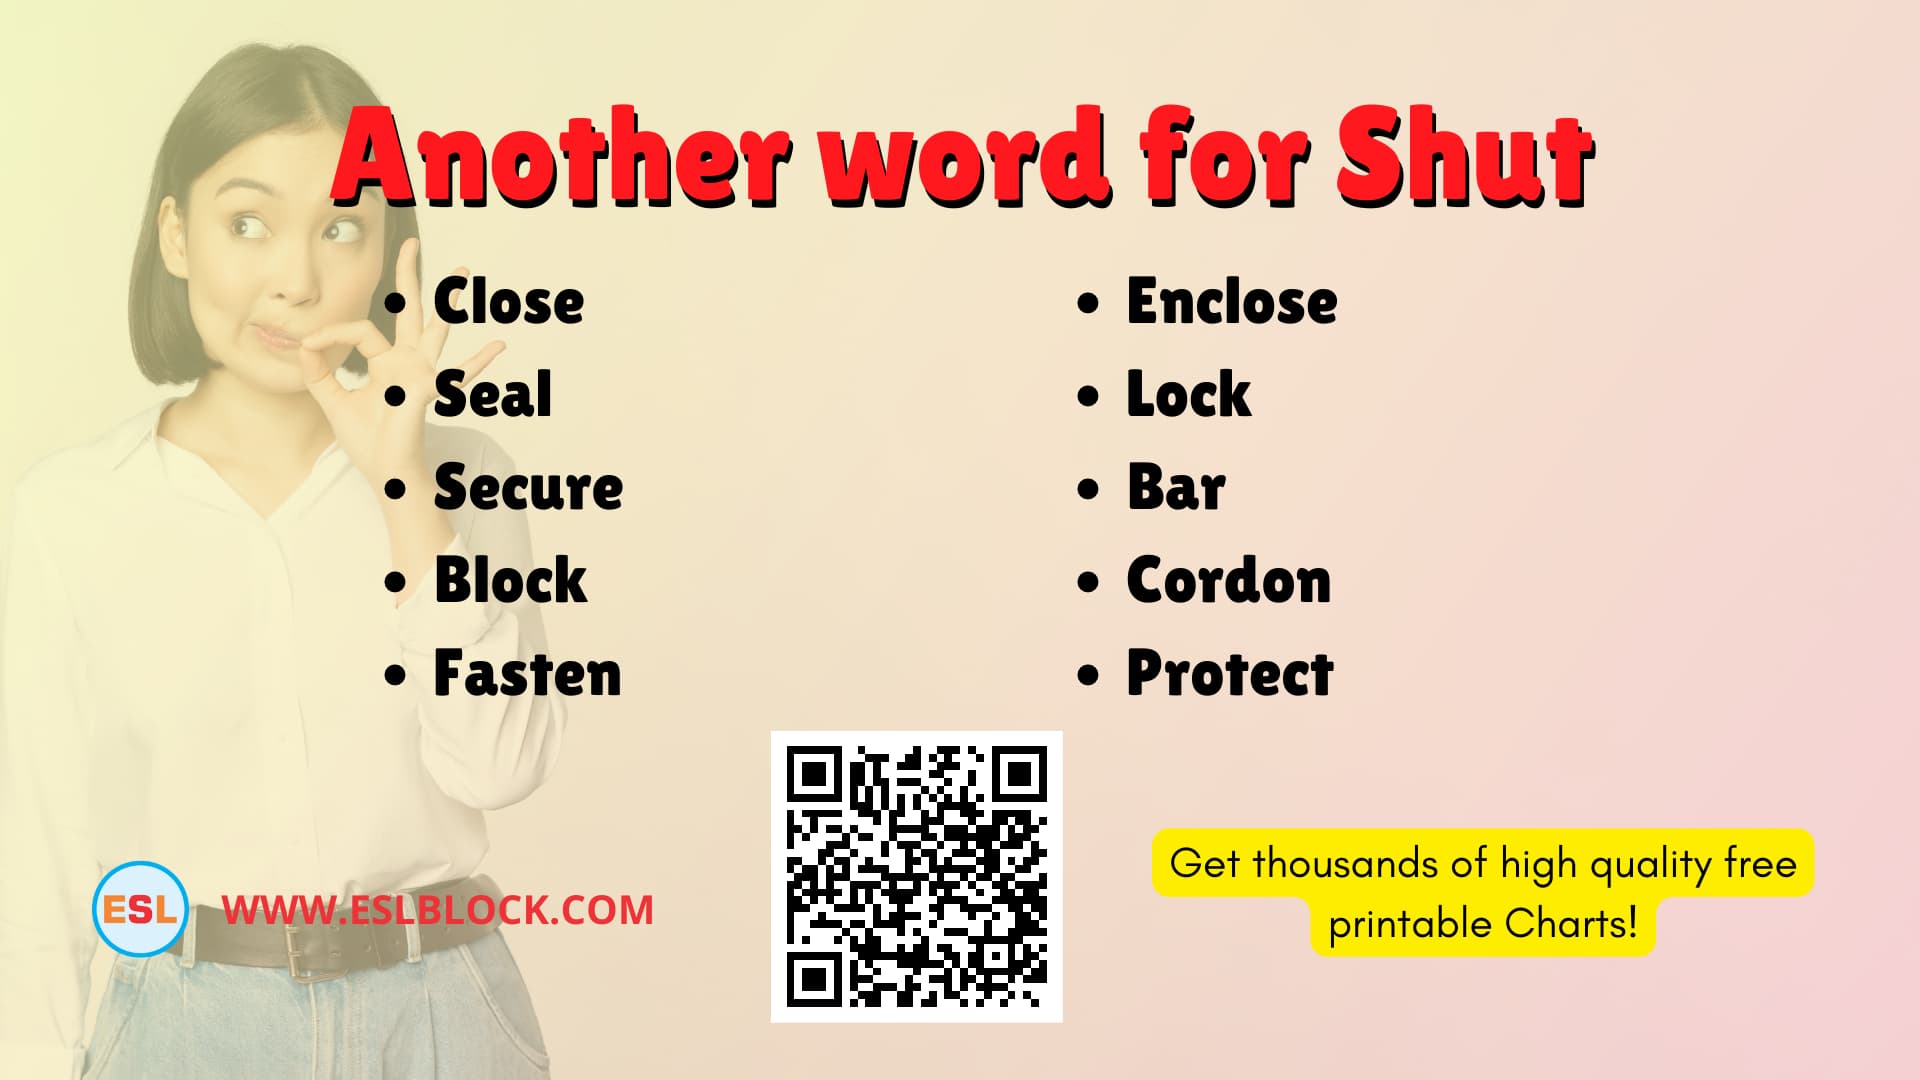 What is another word for Shut